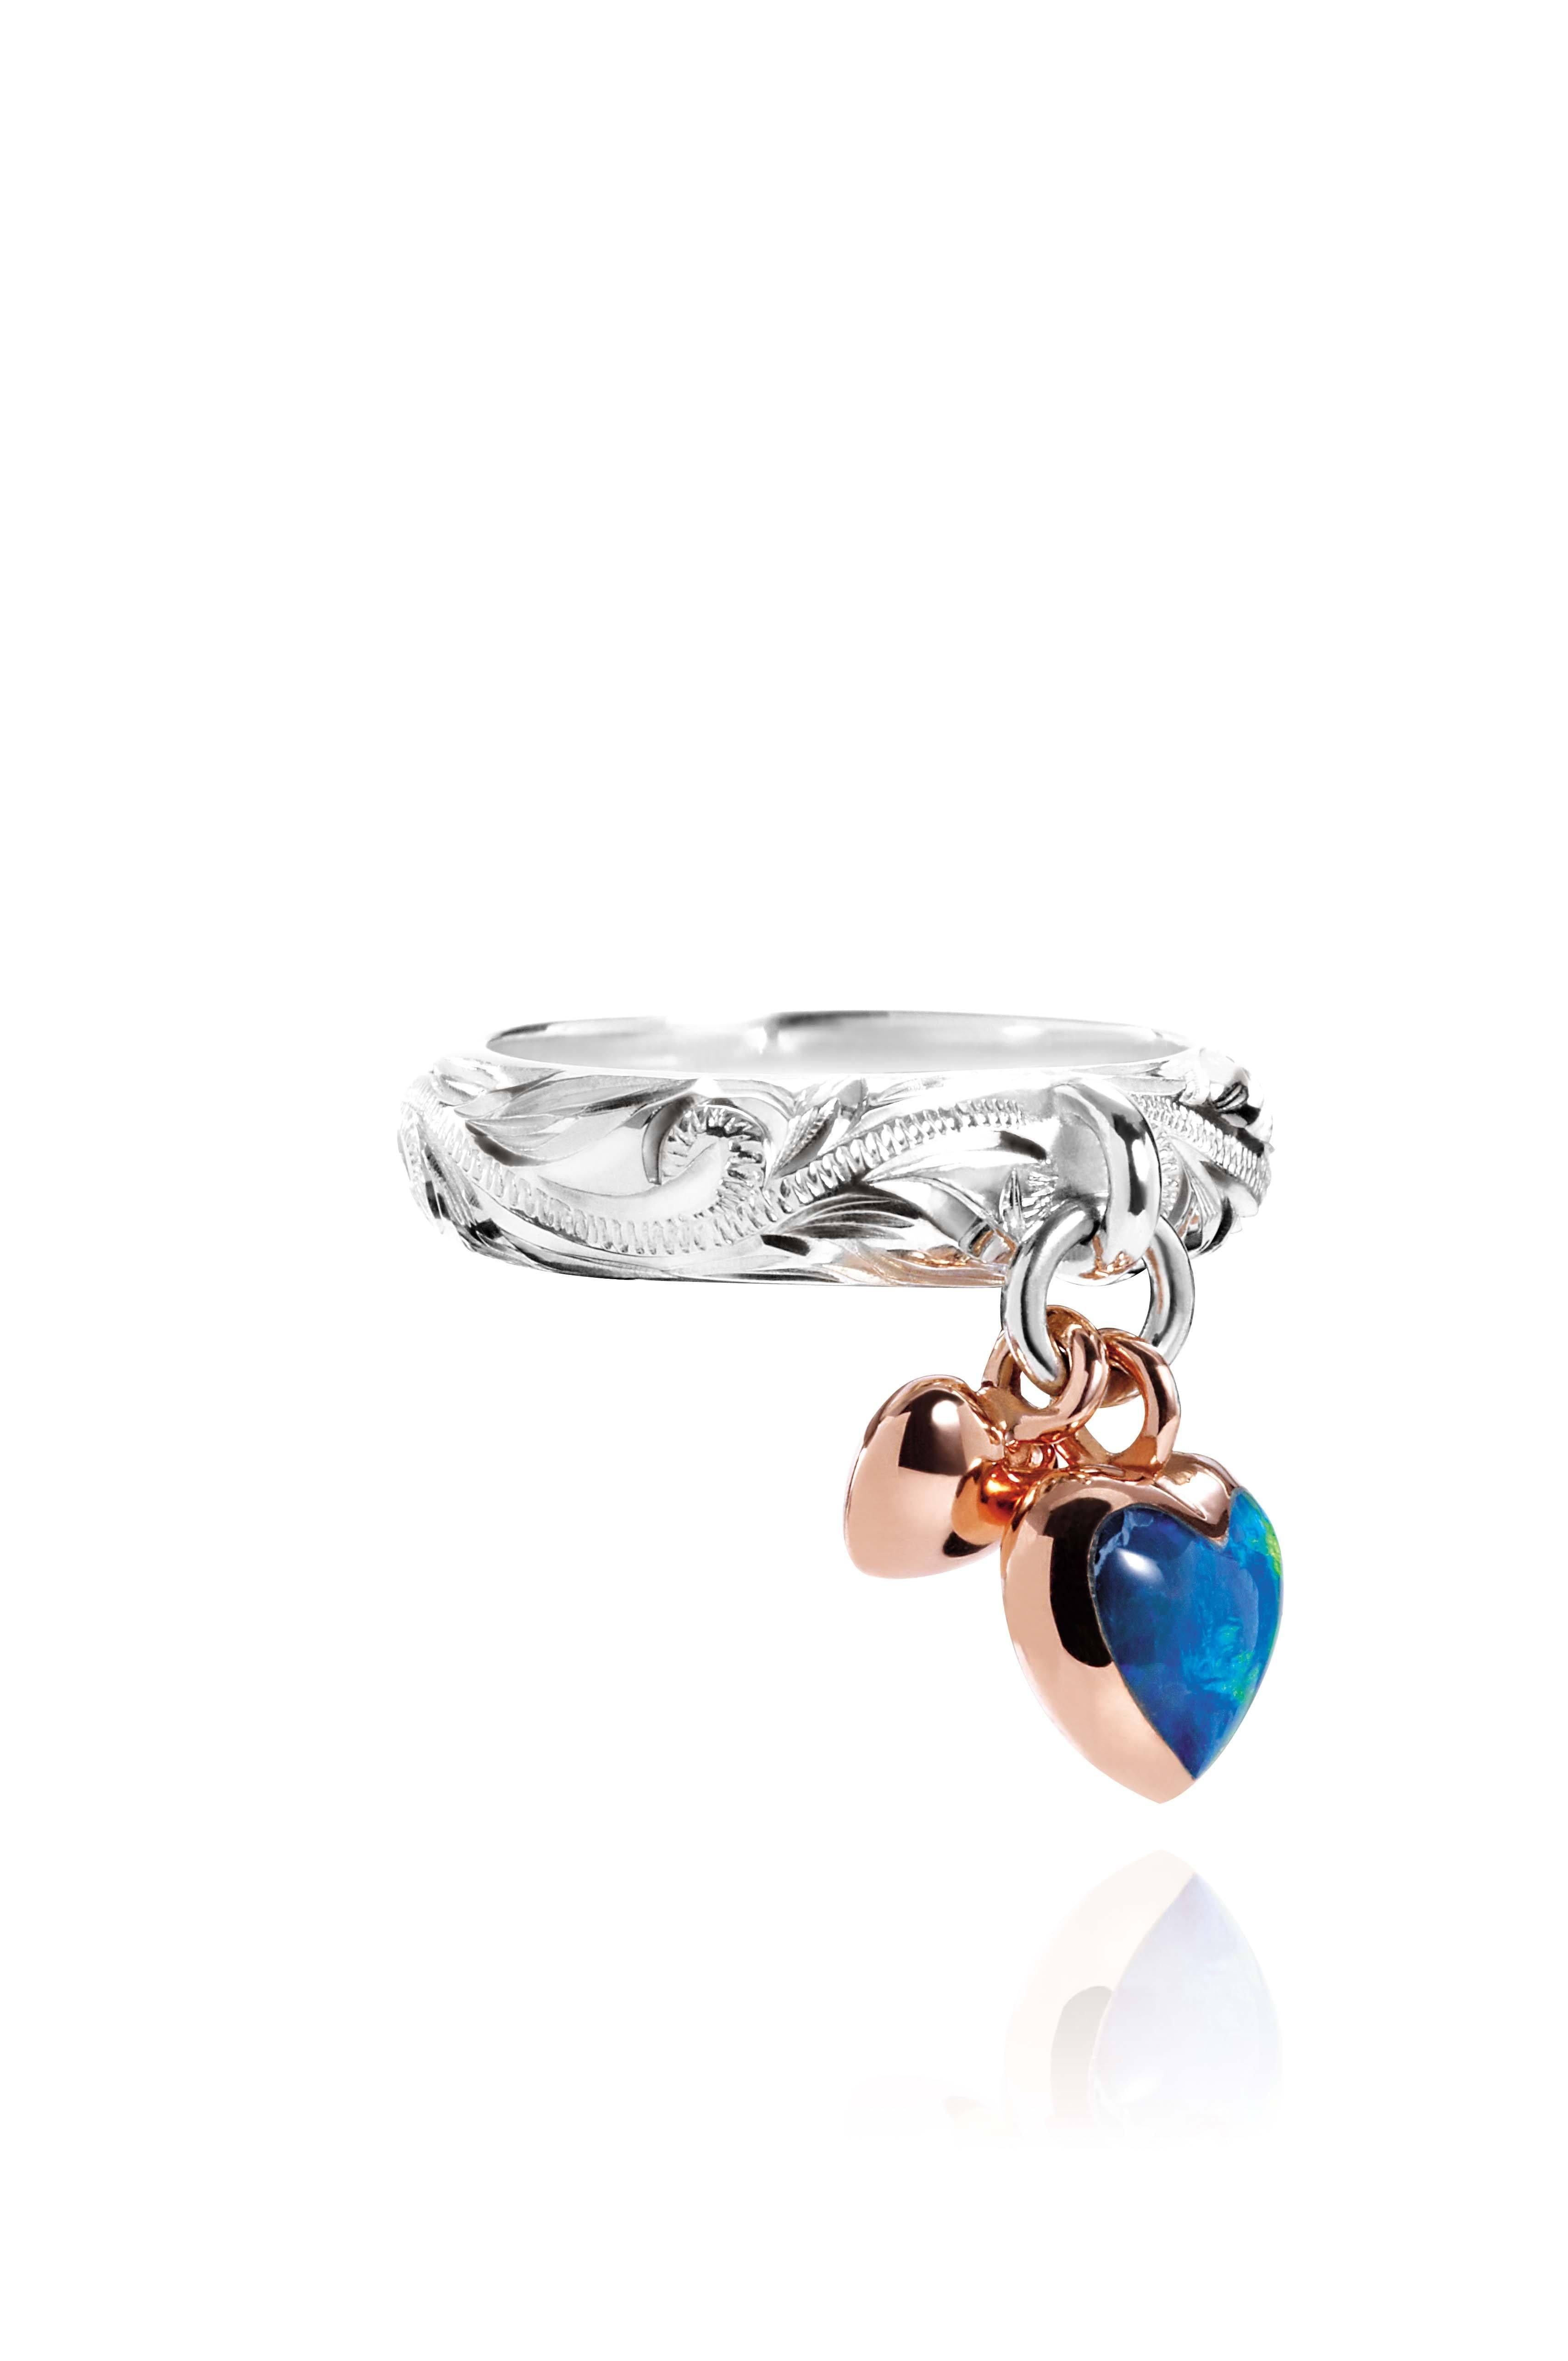 The picture shows a 14K rose gold and 925 sterling silver two-tone heart ring with hand engravings and opal.